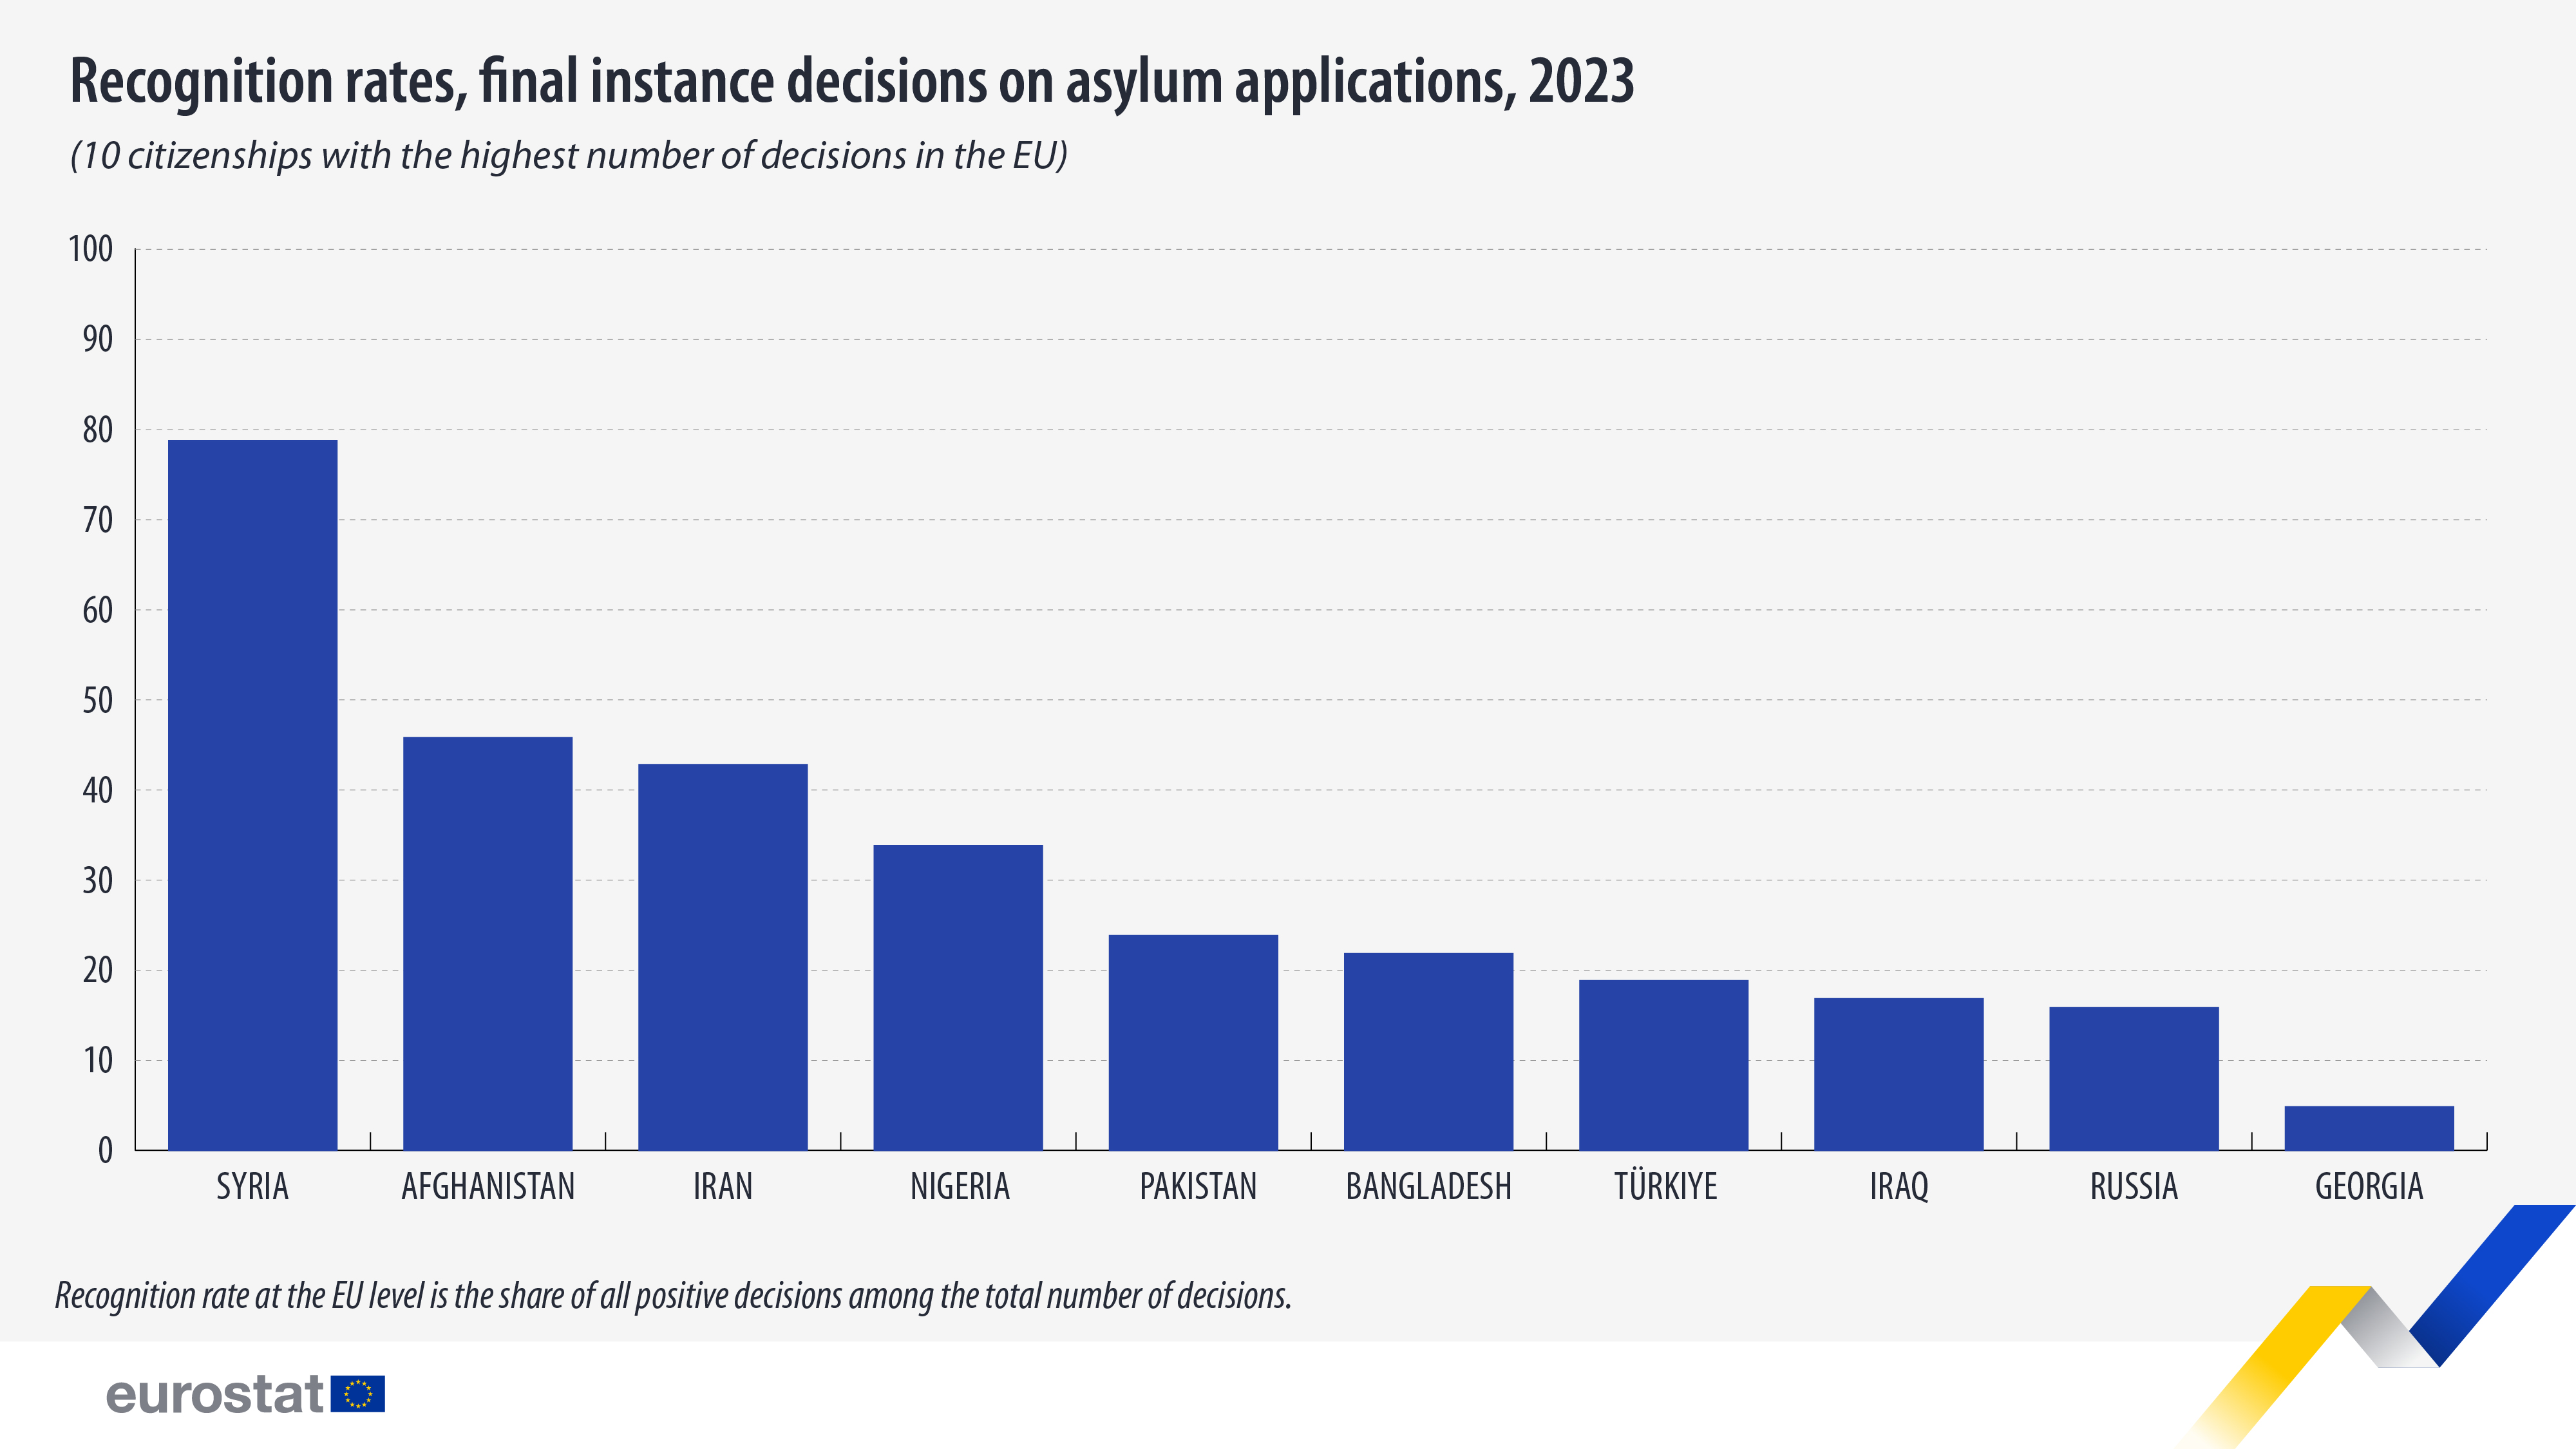 Recognition rates, final instance decision on asylum applications in the EU, 2023, 10 citizenships with the highest number of decisions in the EU. Chart. See link to full dataset below.